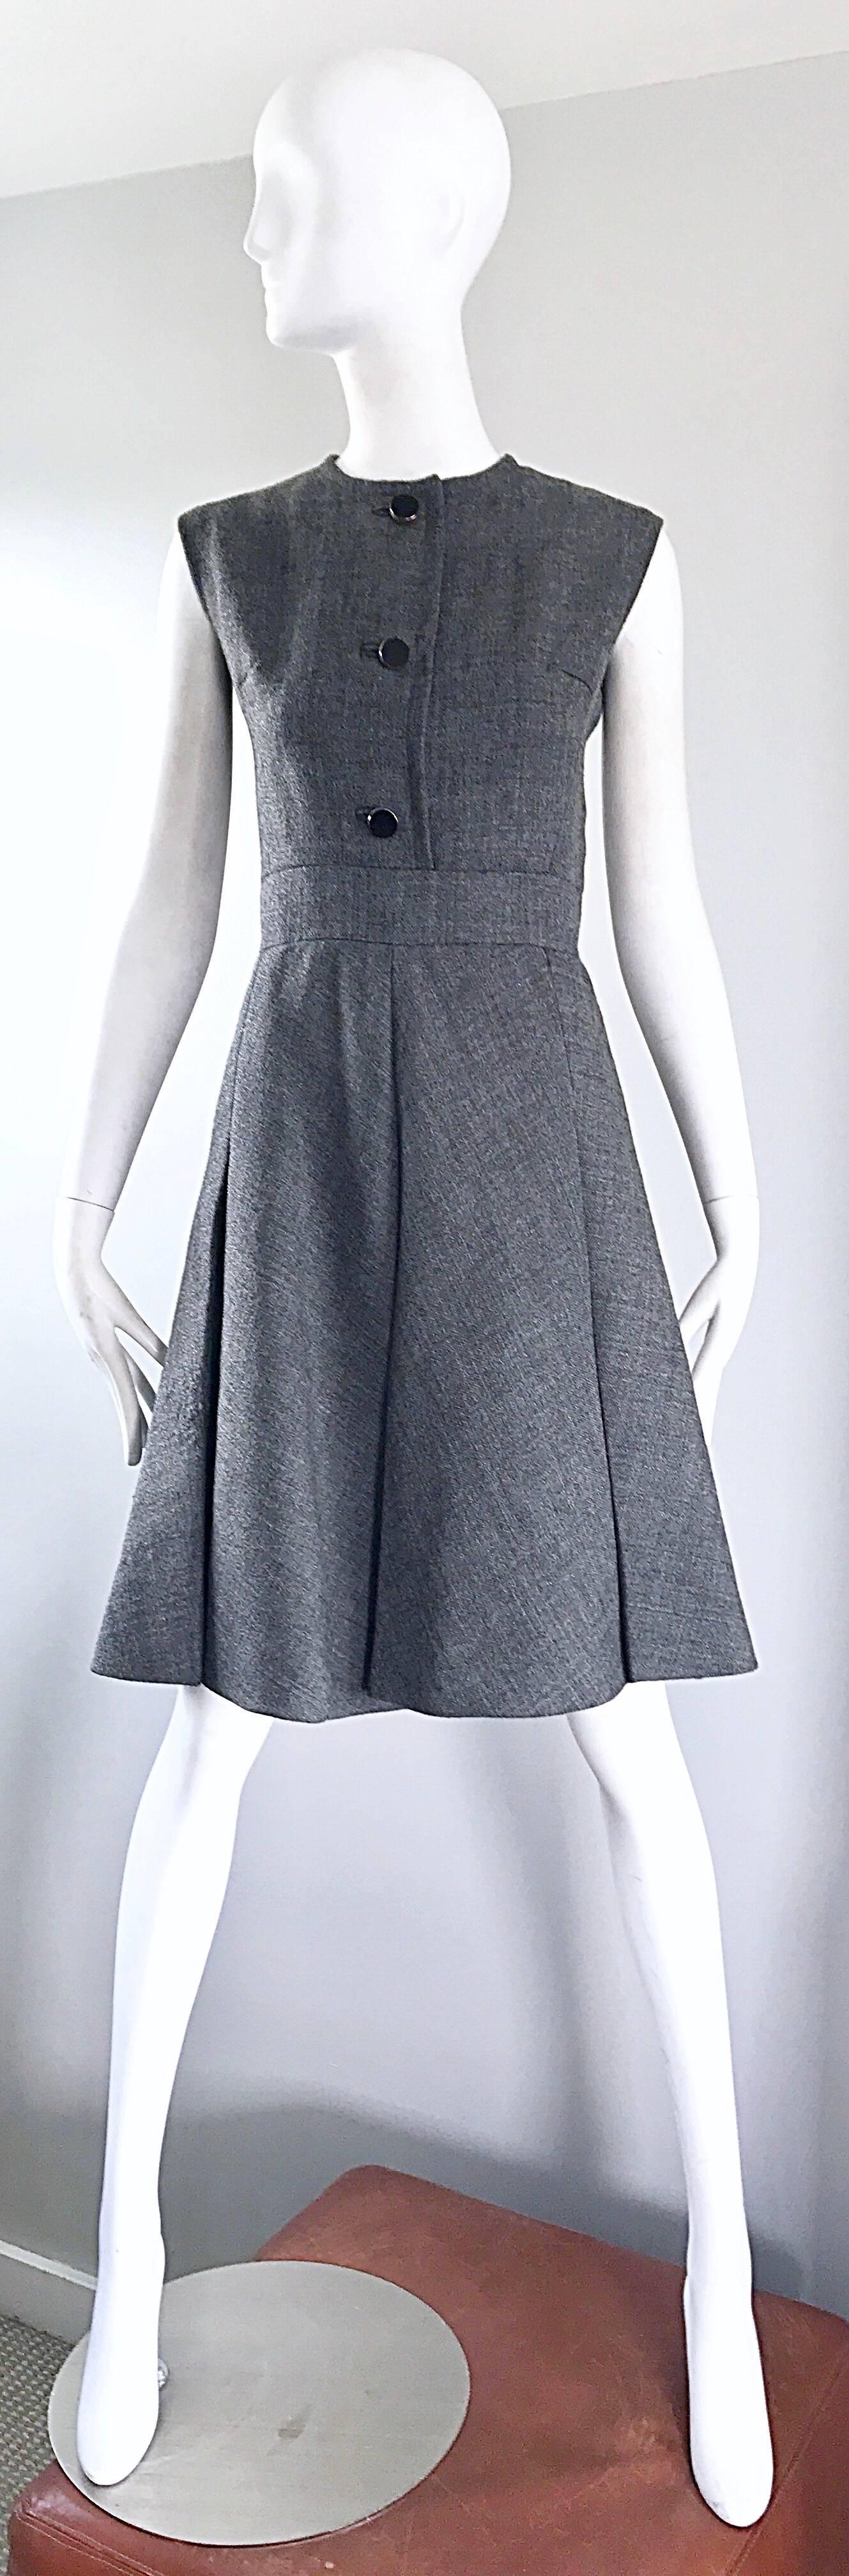 Stunning 1960s NINA RICCI HAUTE COUTURE gray wool A-Line dress and matching belted jacket suit! Jacket features the original black patent leather belt, and matching buttons. Two pockets at each side of the waist. Dress features a fitted bodice, and